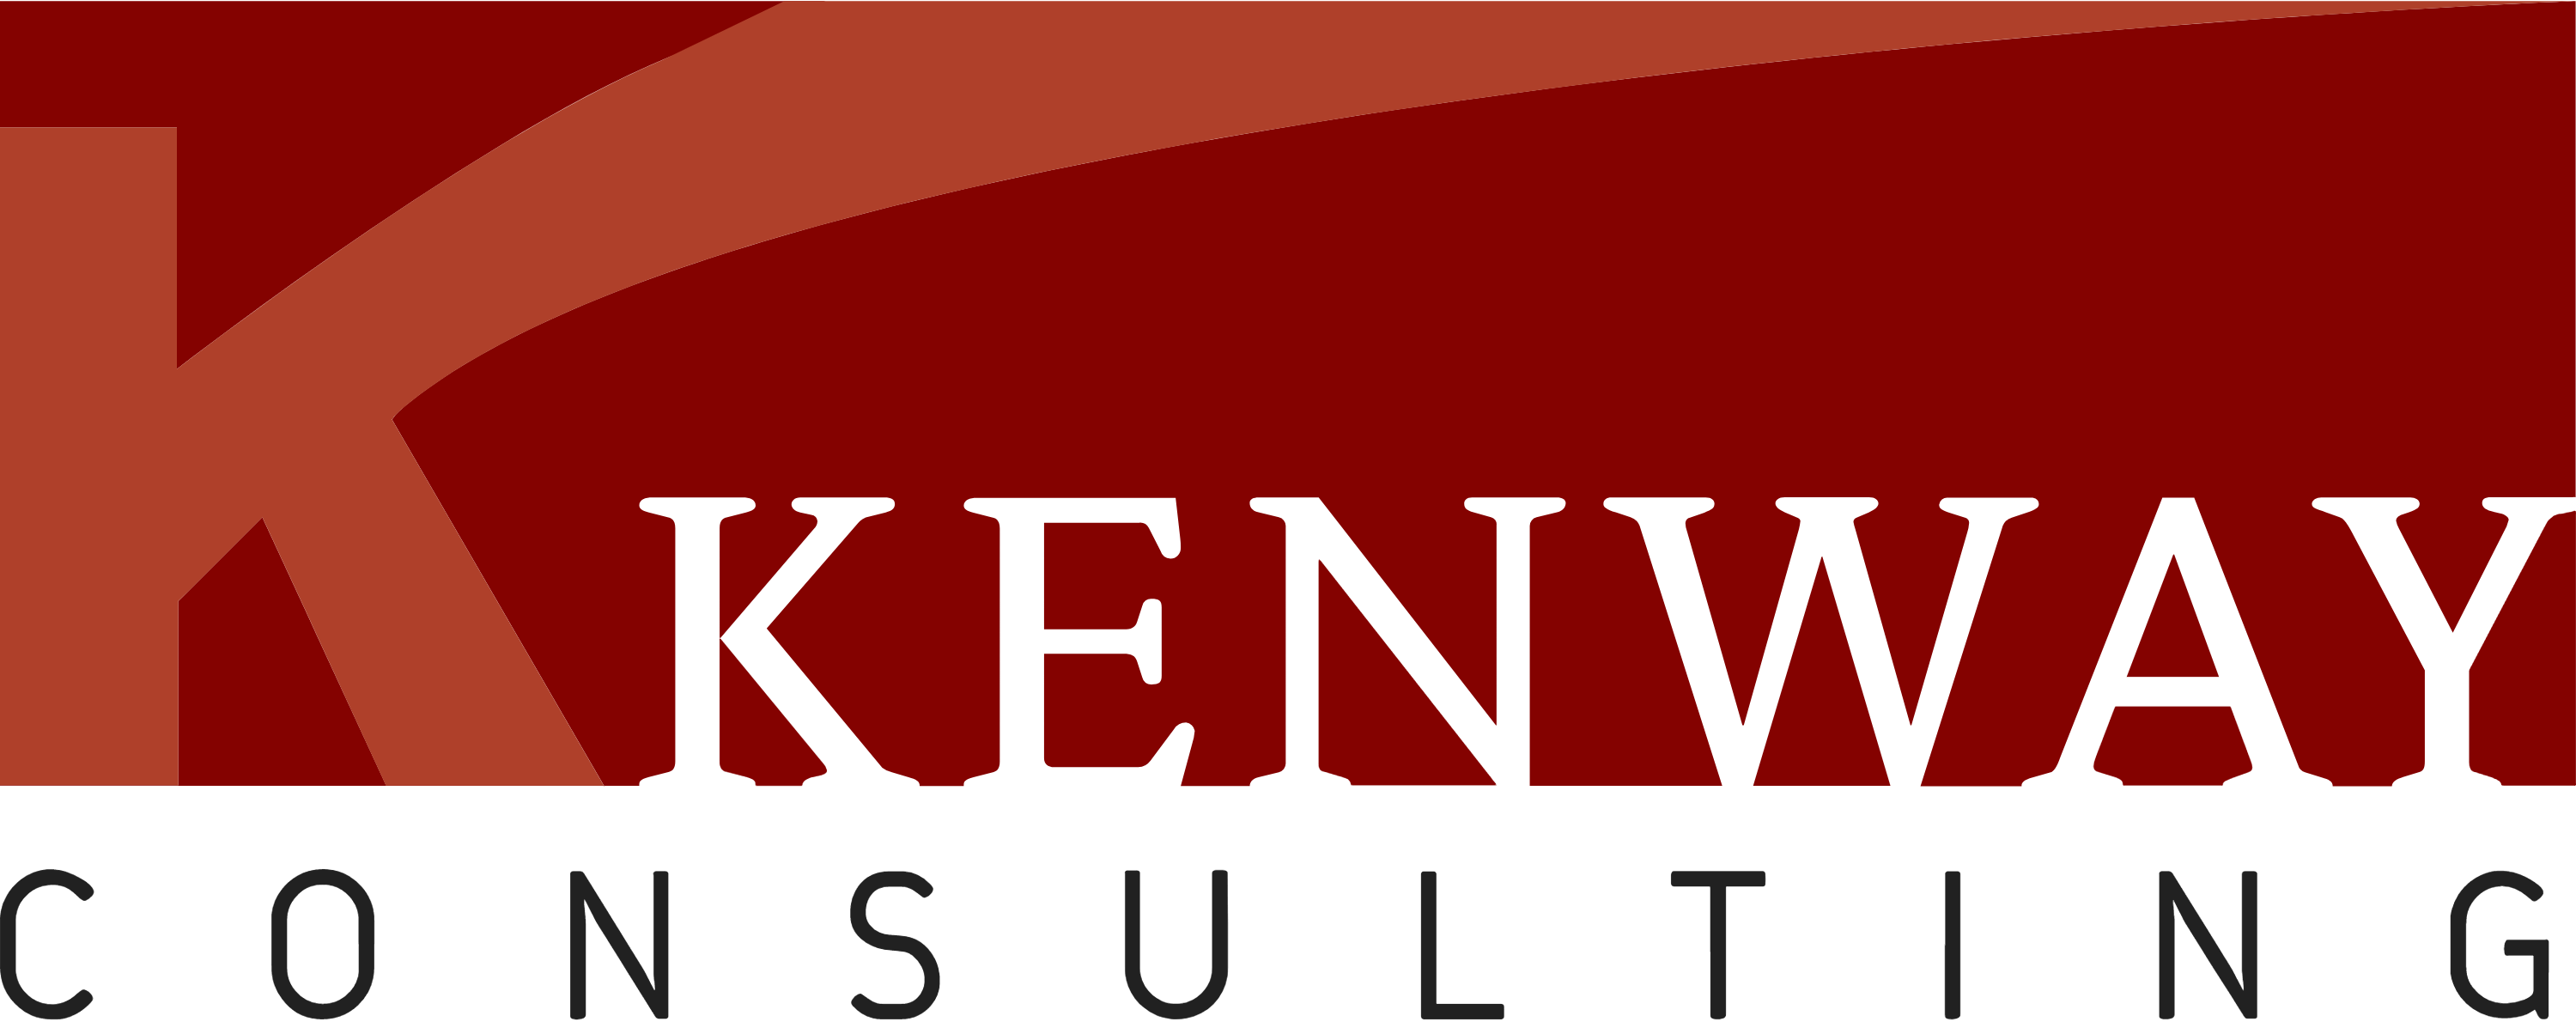 Kenway Consulting Logo